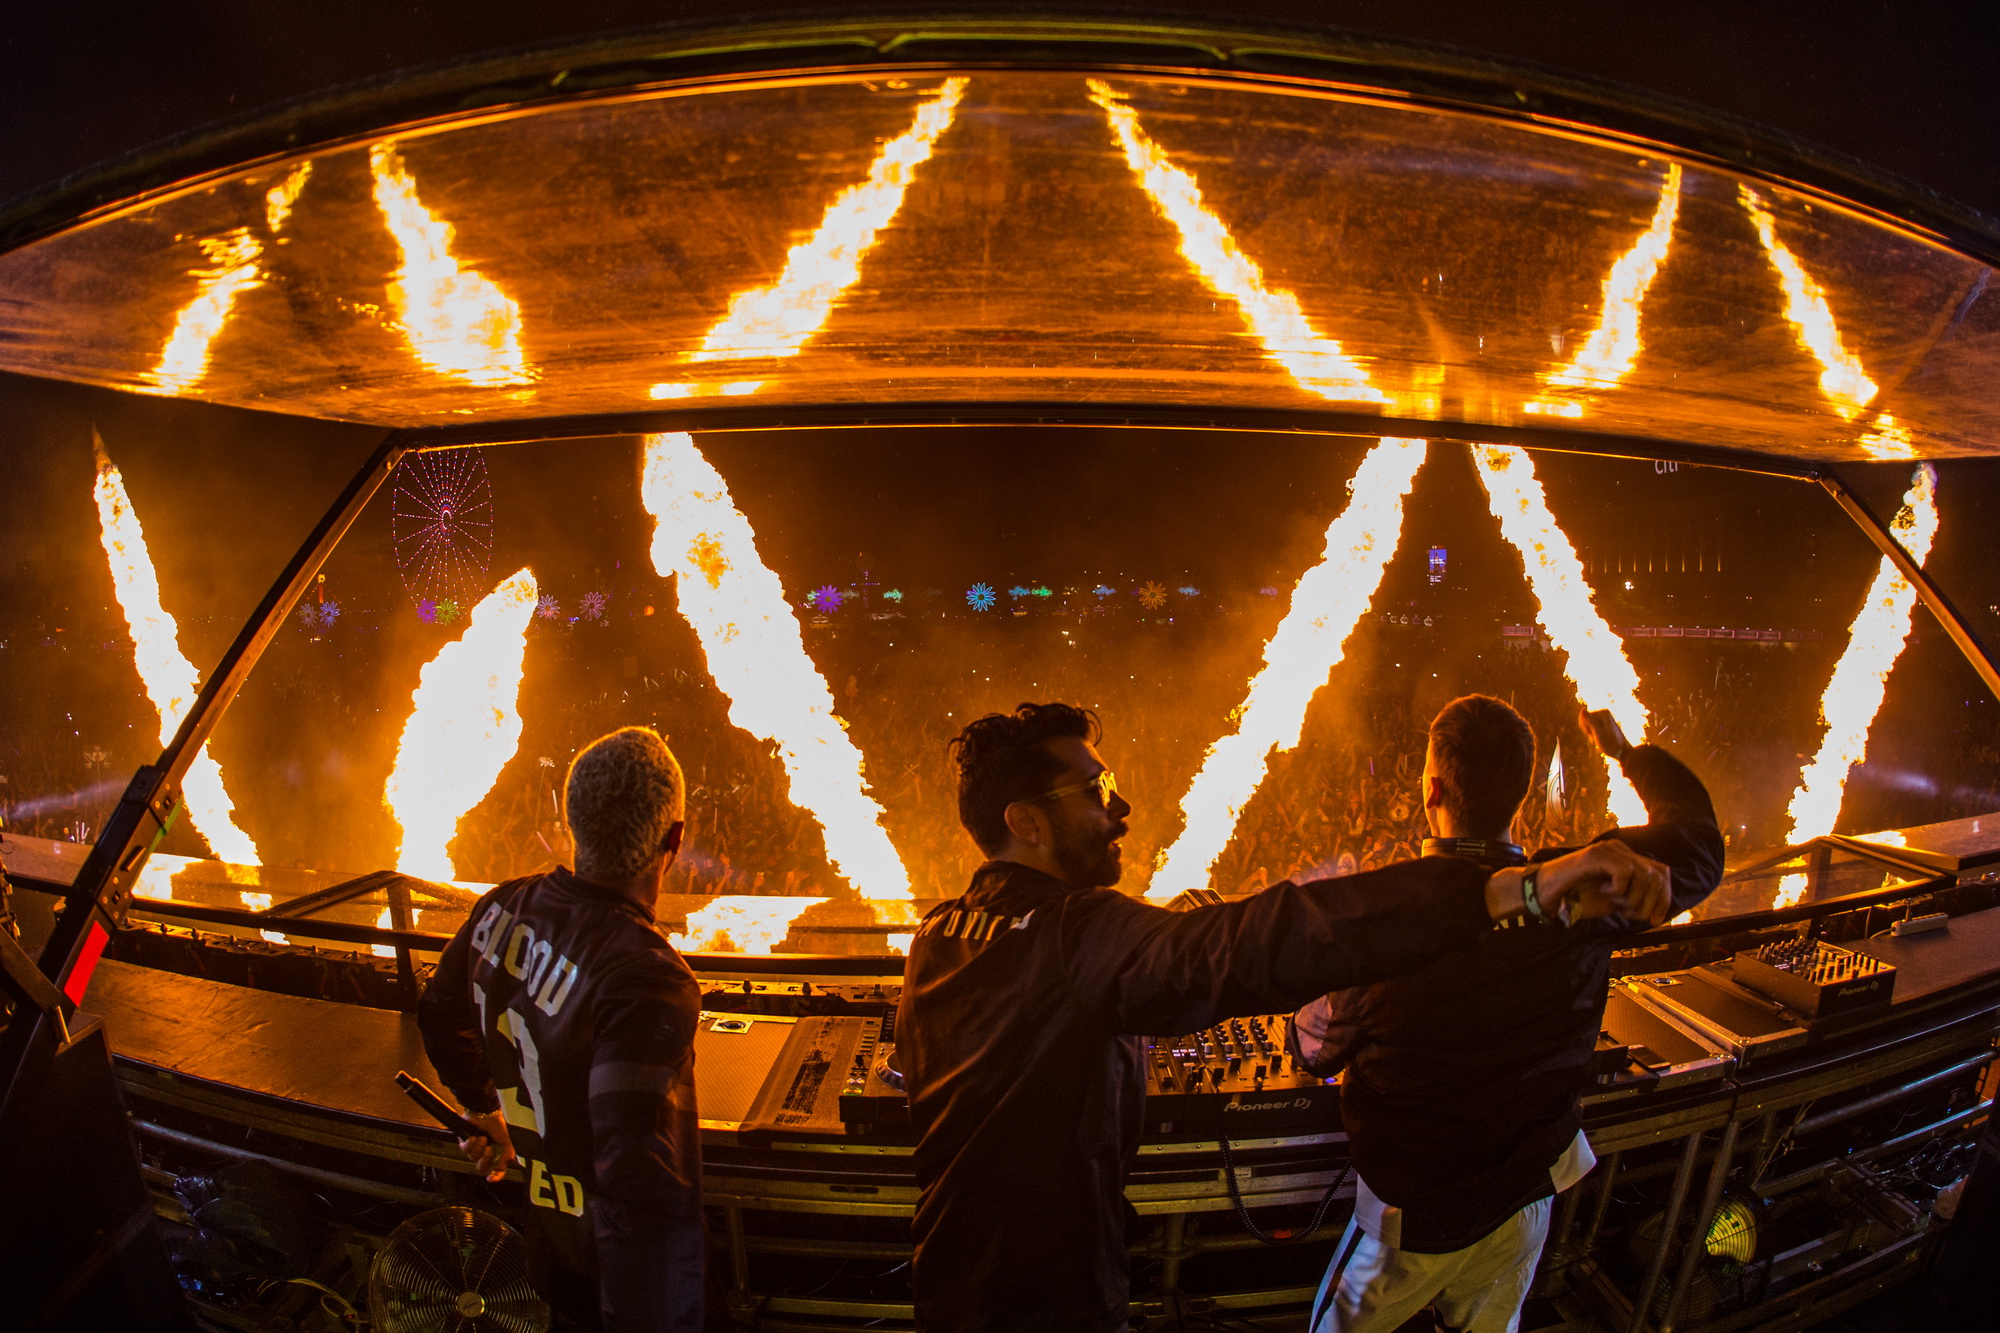 YELLOW CLAW